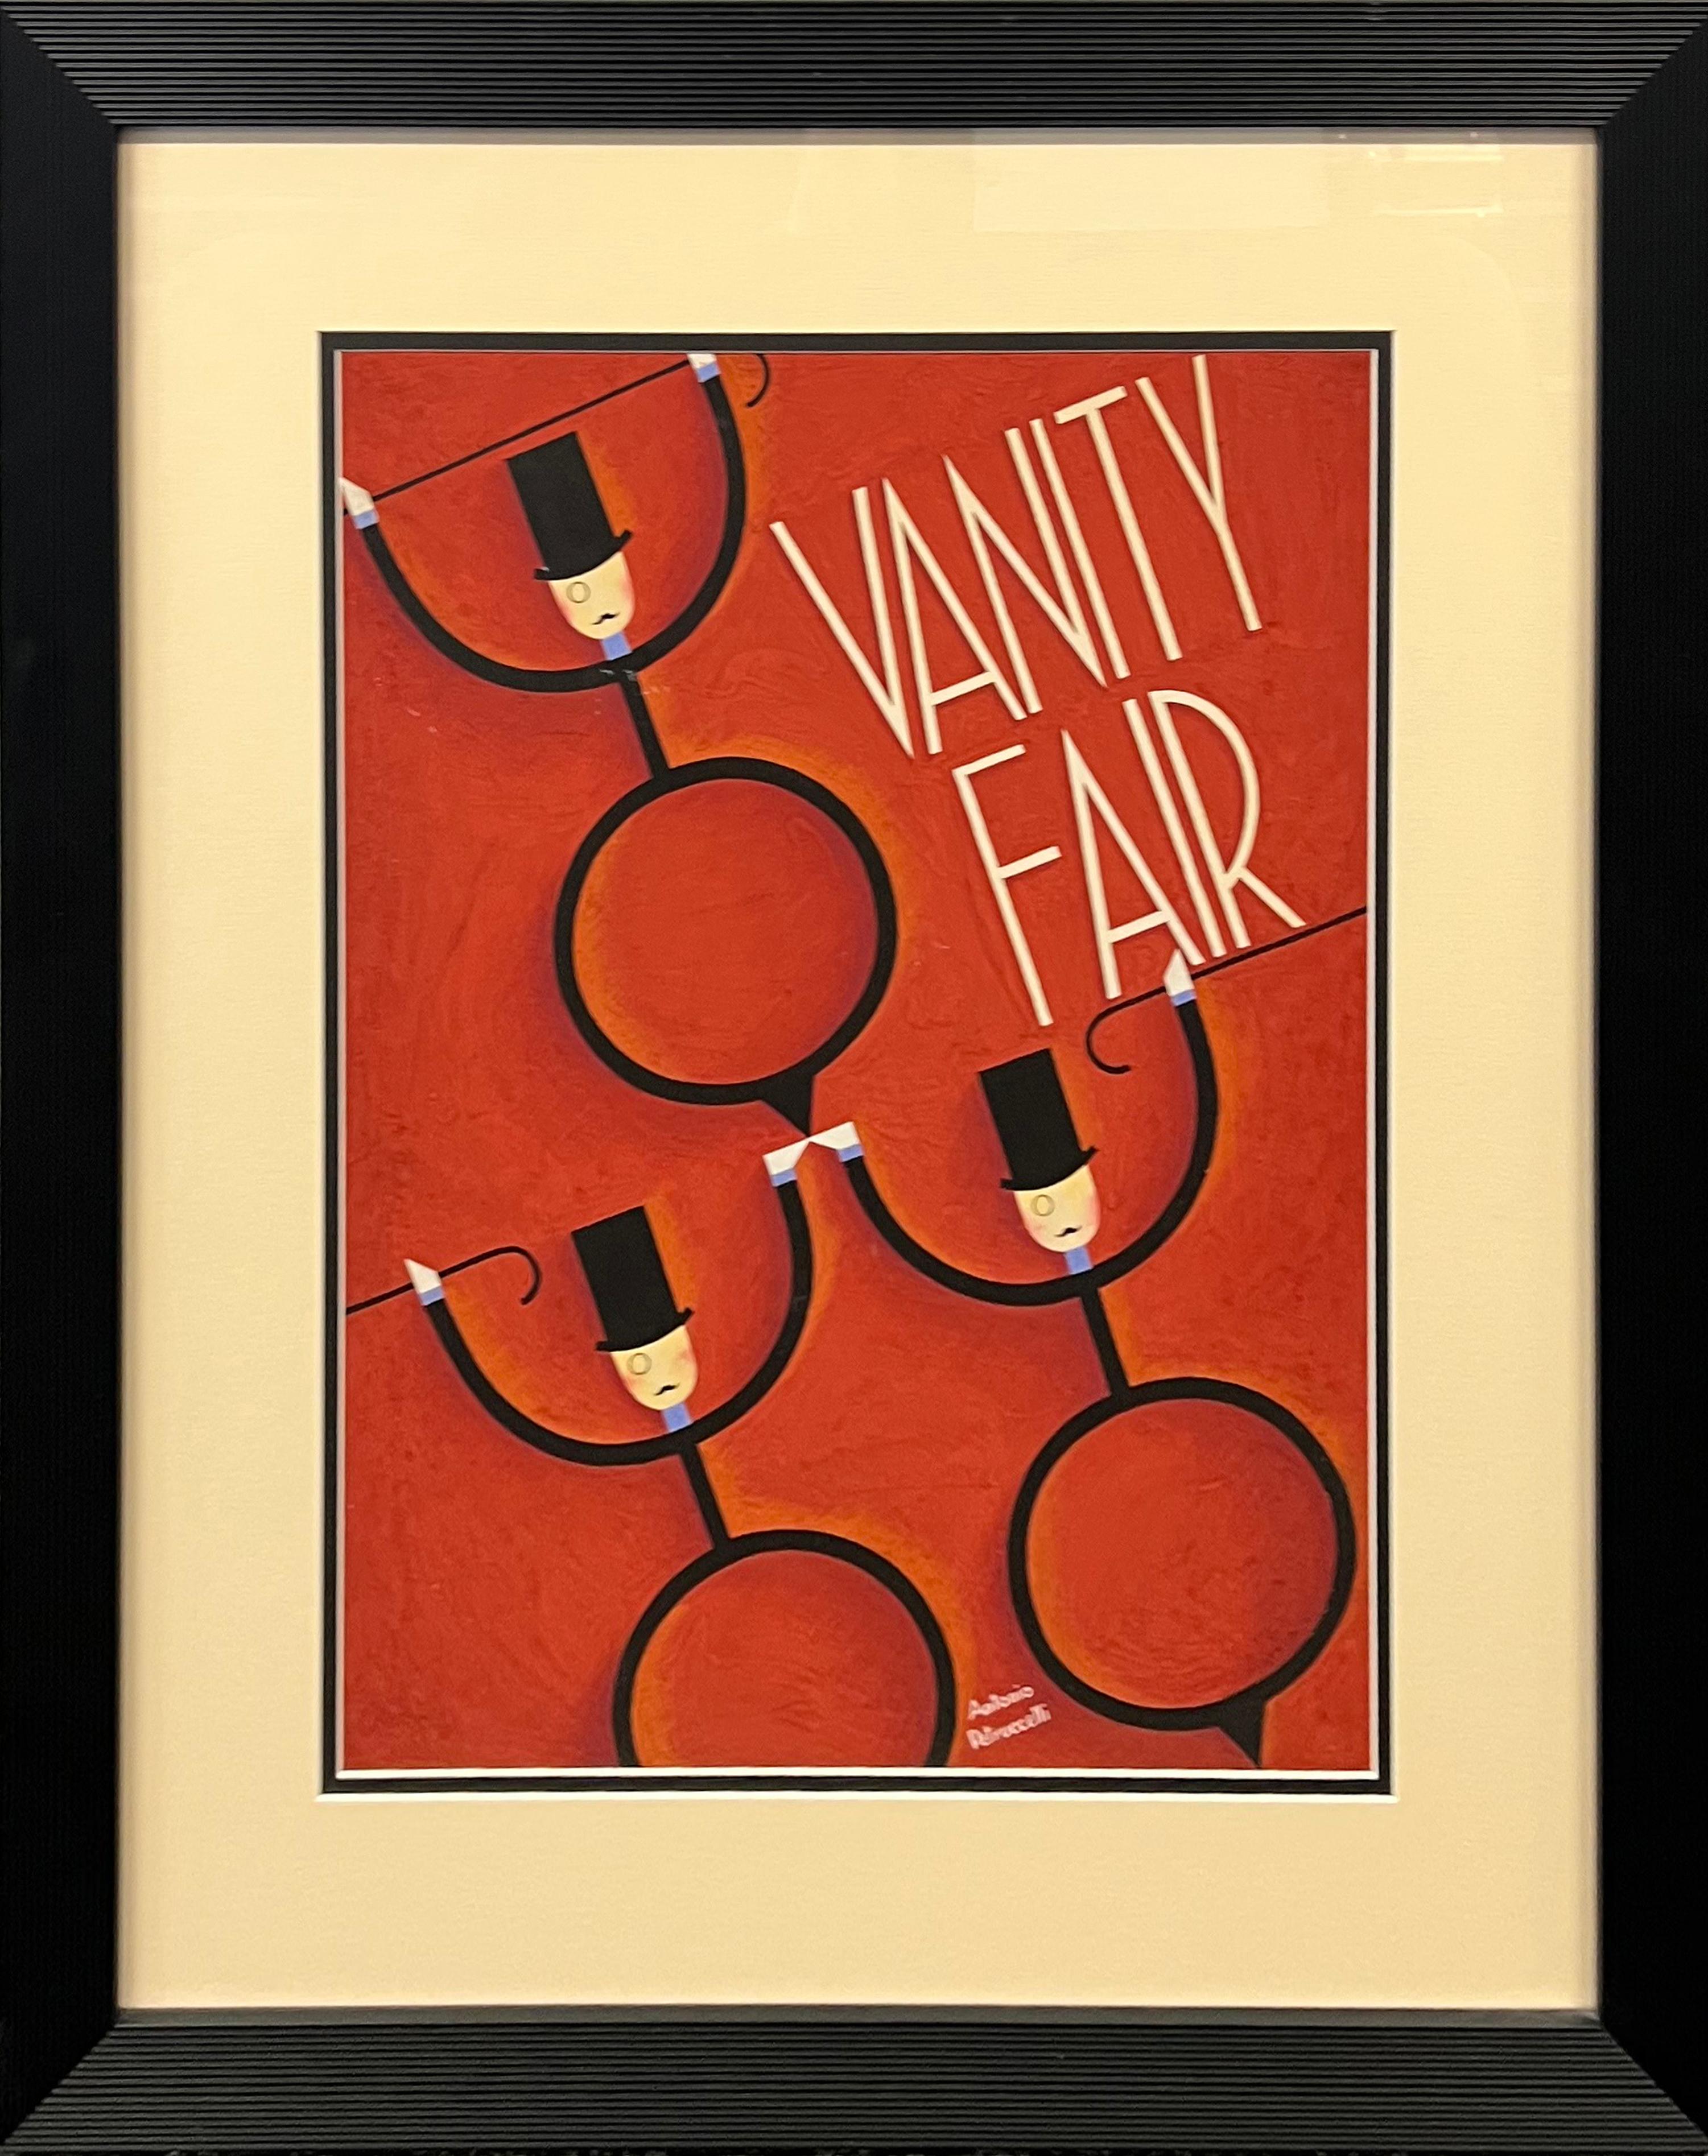 Original Painting. Vanity Fair Illustration Proposal. Art Deco Modern 1930s

Antonio Petruccelli (1907 - 1994)
Vanity Fair
Illustration proposal, c 1930’s
18 X 13 3/4 inches (sight)
Framed 26 3/4 X 22 1/2 inches
Gouache on board
Signed Lower